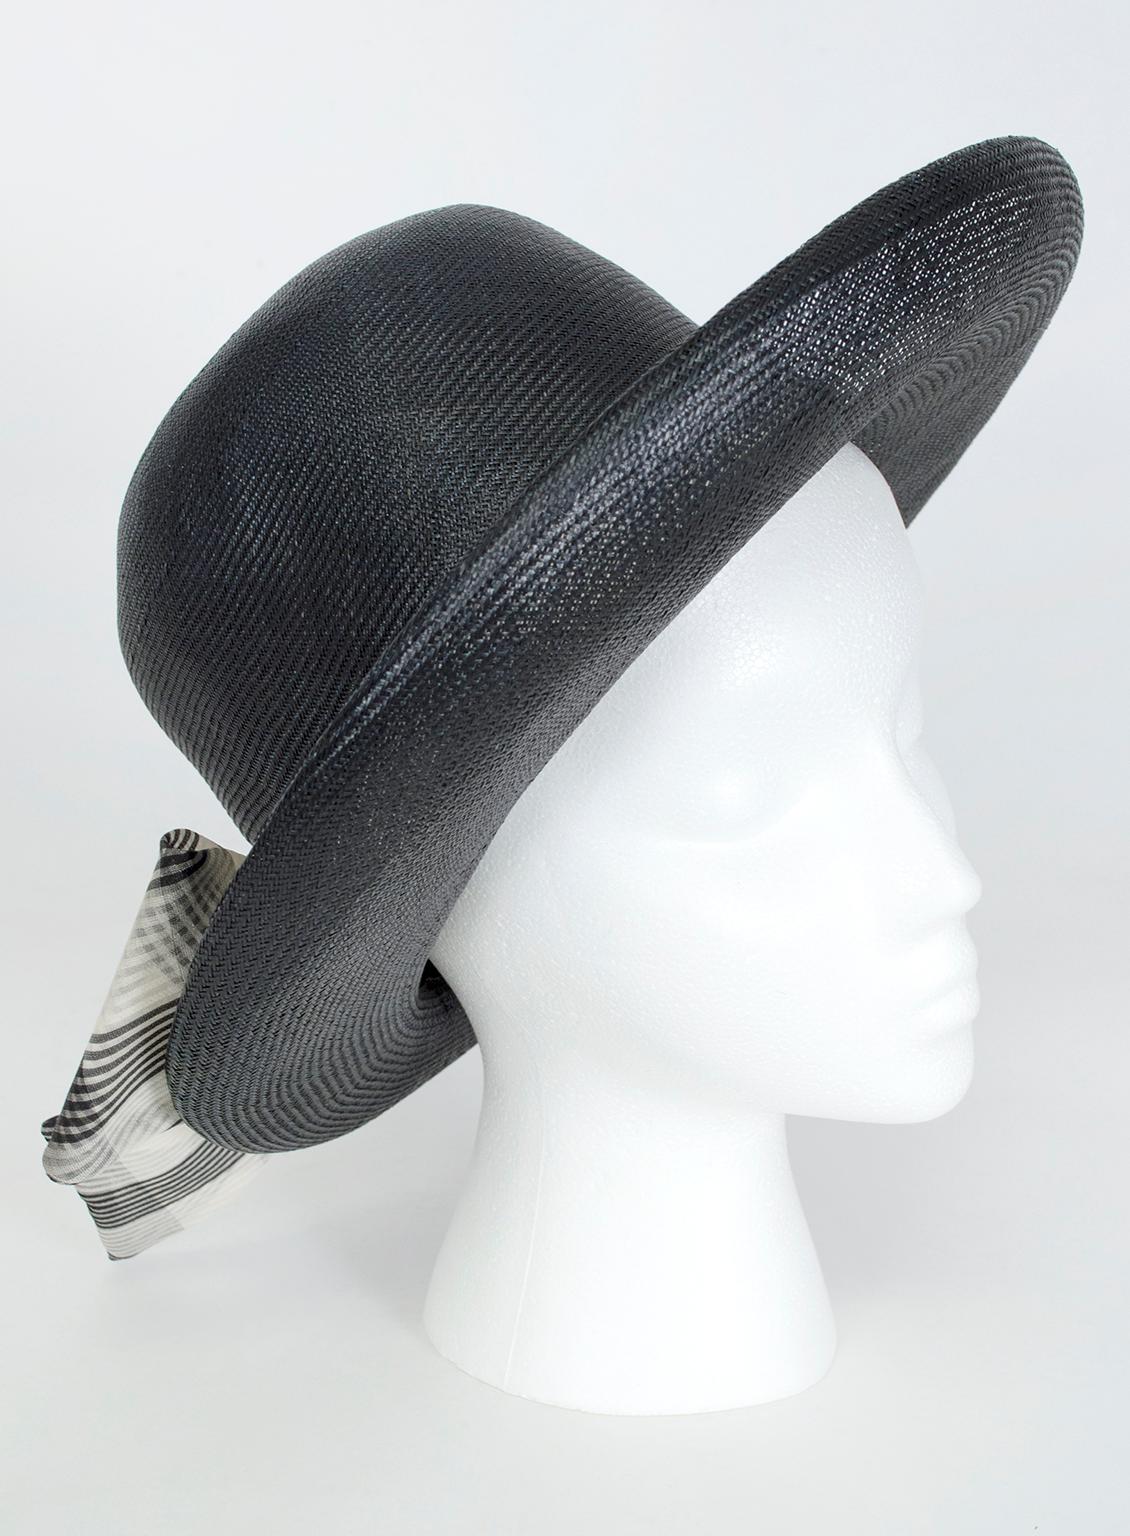 A true transitional piece, this hat can take you from season to season thanks to its tight weave and dark color. The fixed scarf adds the bit of French flair for which the milliner was beloved.

Straw basketweave sun hat with rolled brim trimmed in